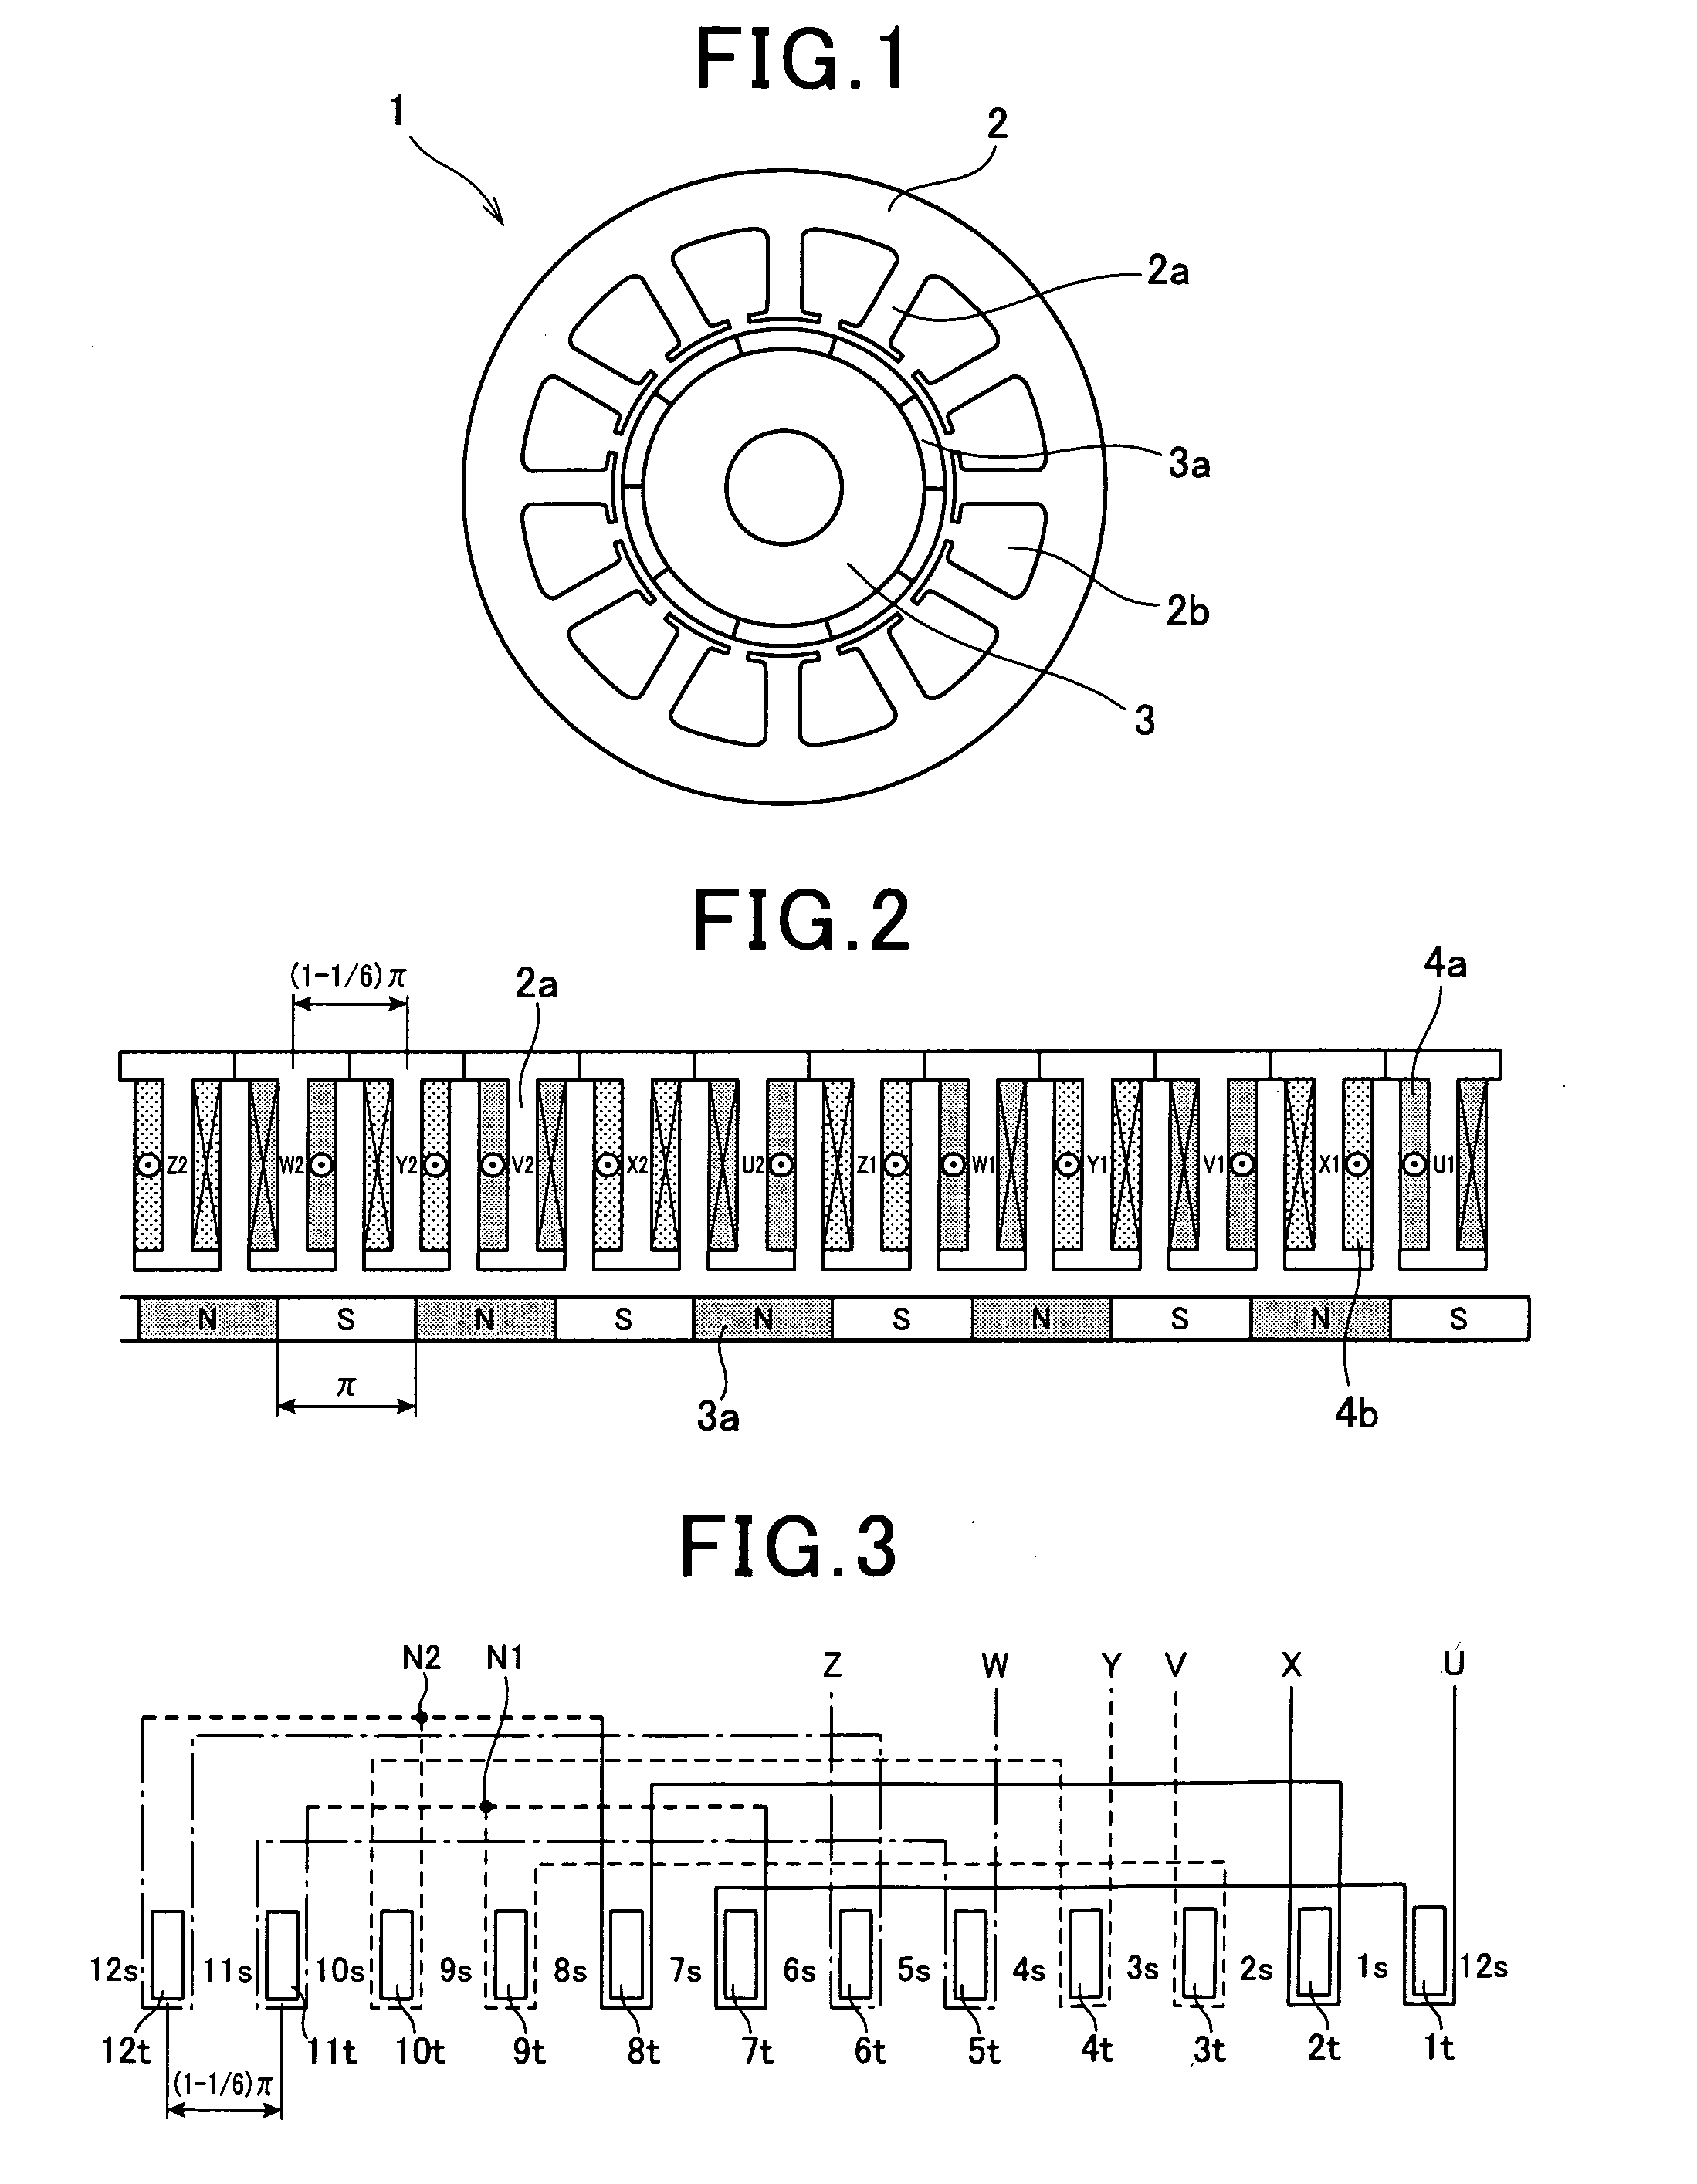 Electric rotating machine having improved stator coil arrangement for reducing magnetic noise and torque ripple